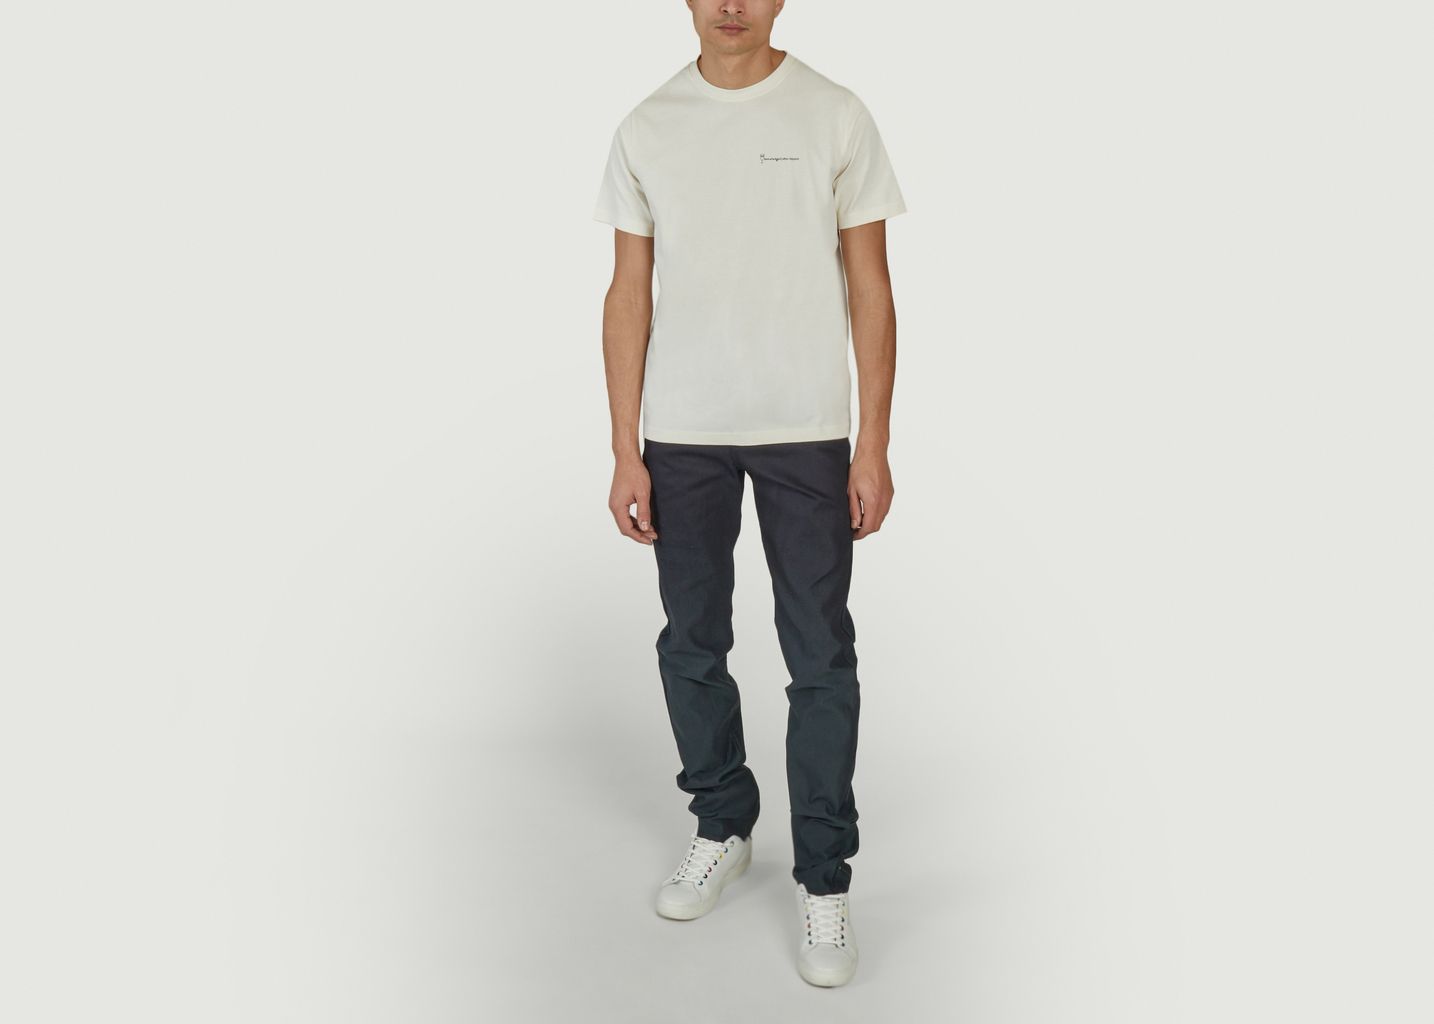 Jean Weird Guy Gradient Denim - Naked and Famous